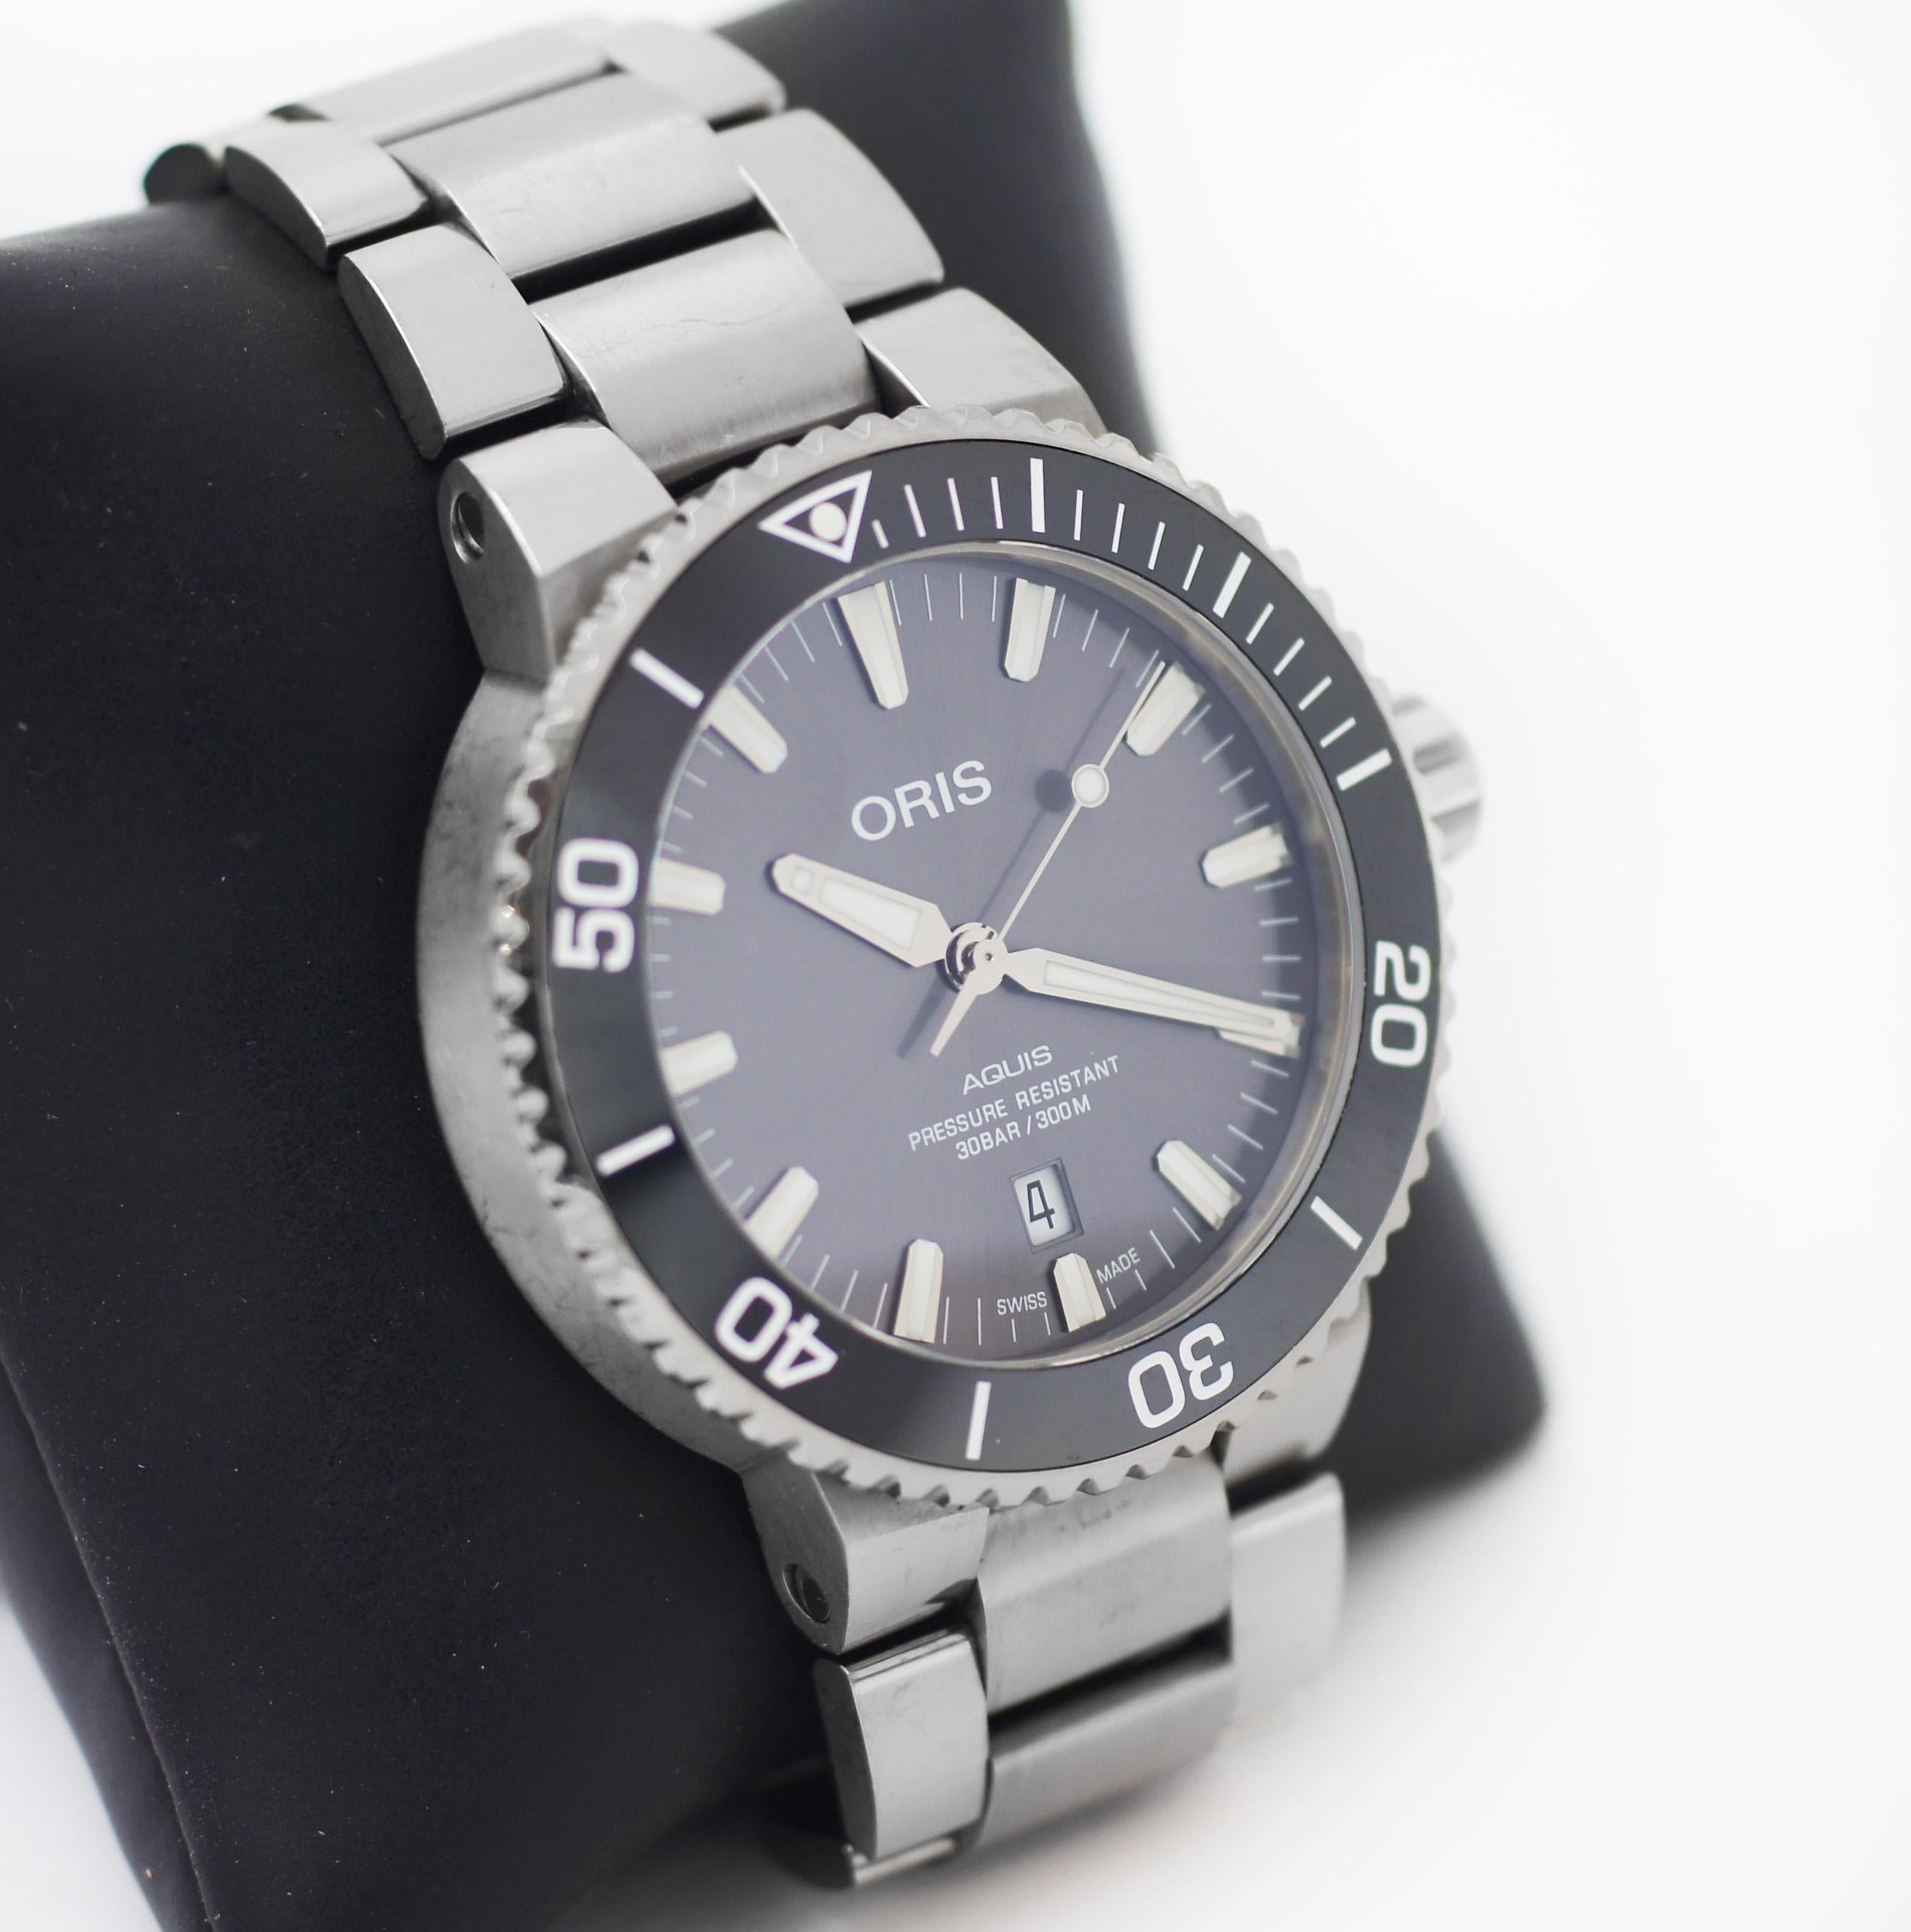 ORIS Aquis a true masterpiece of design and engineering features a sleek grey dial that offers excellent readability even in low-light conditions with a date function that displays the date at the 6 o'clock position and luminescent hands and